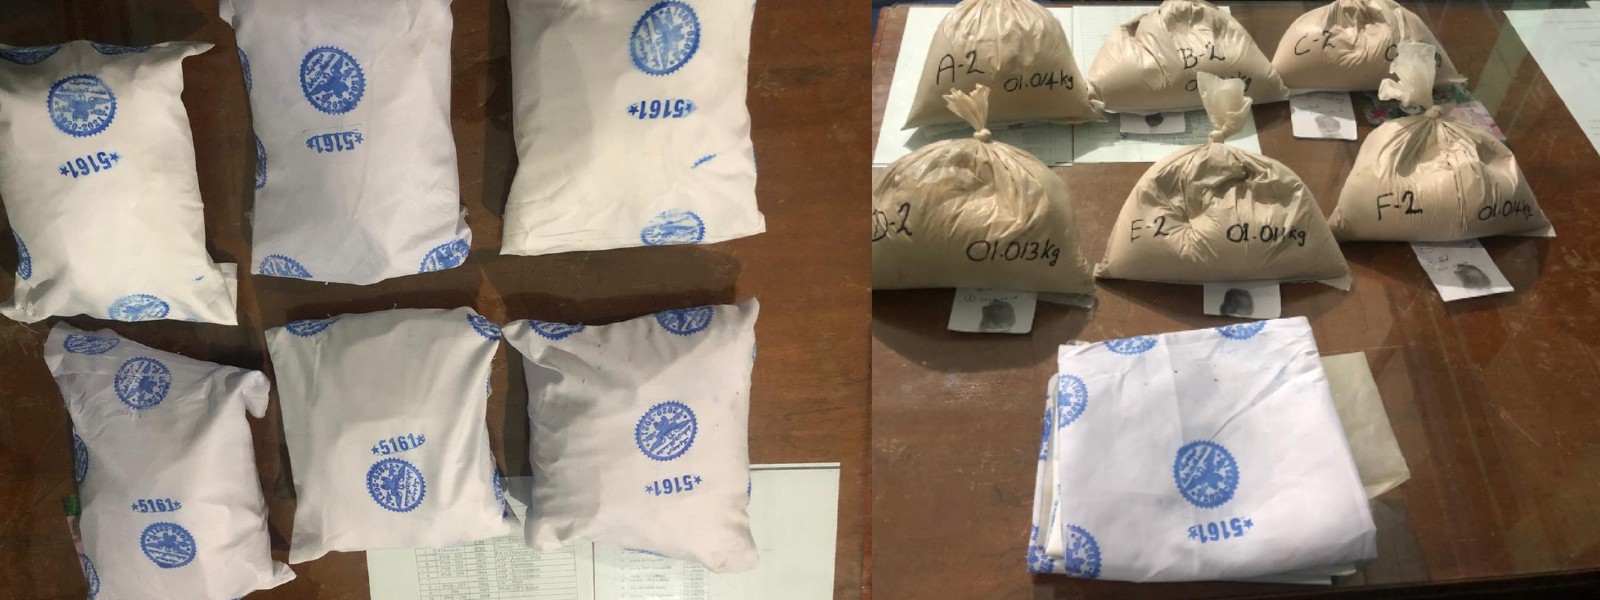 PNB seizes 06 kg of heroin from Negombo